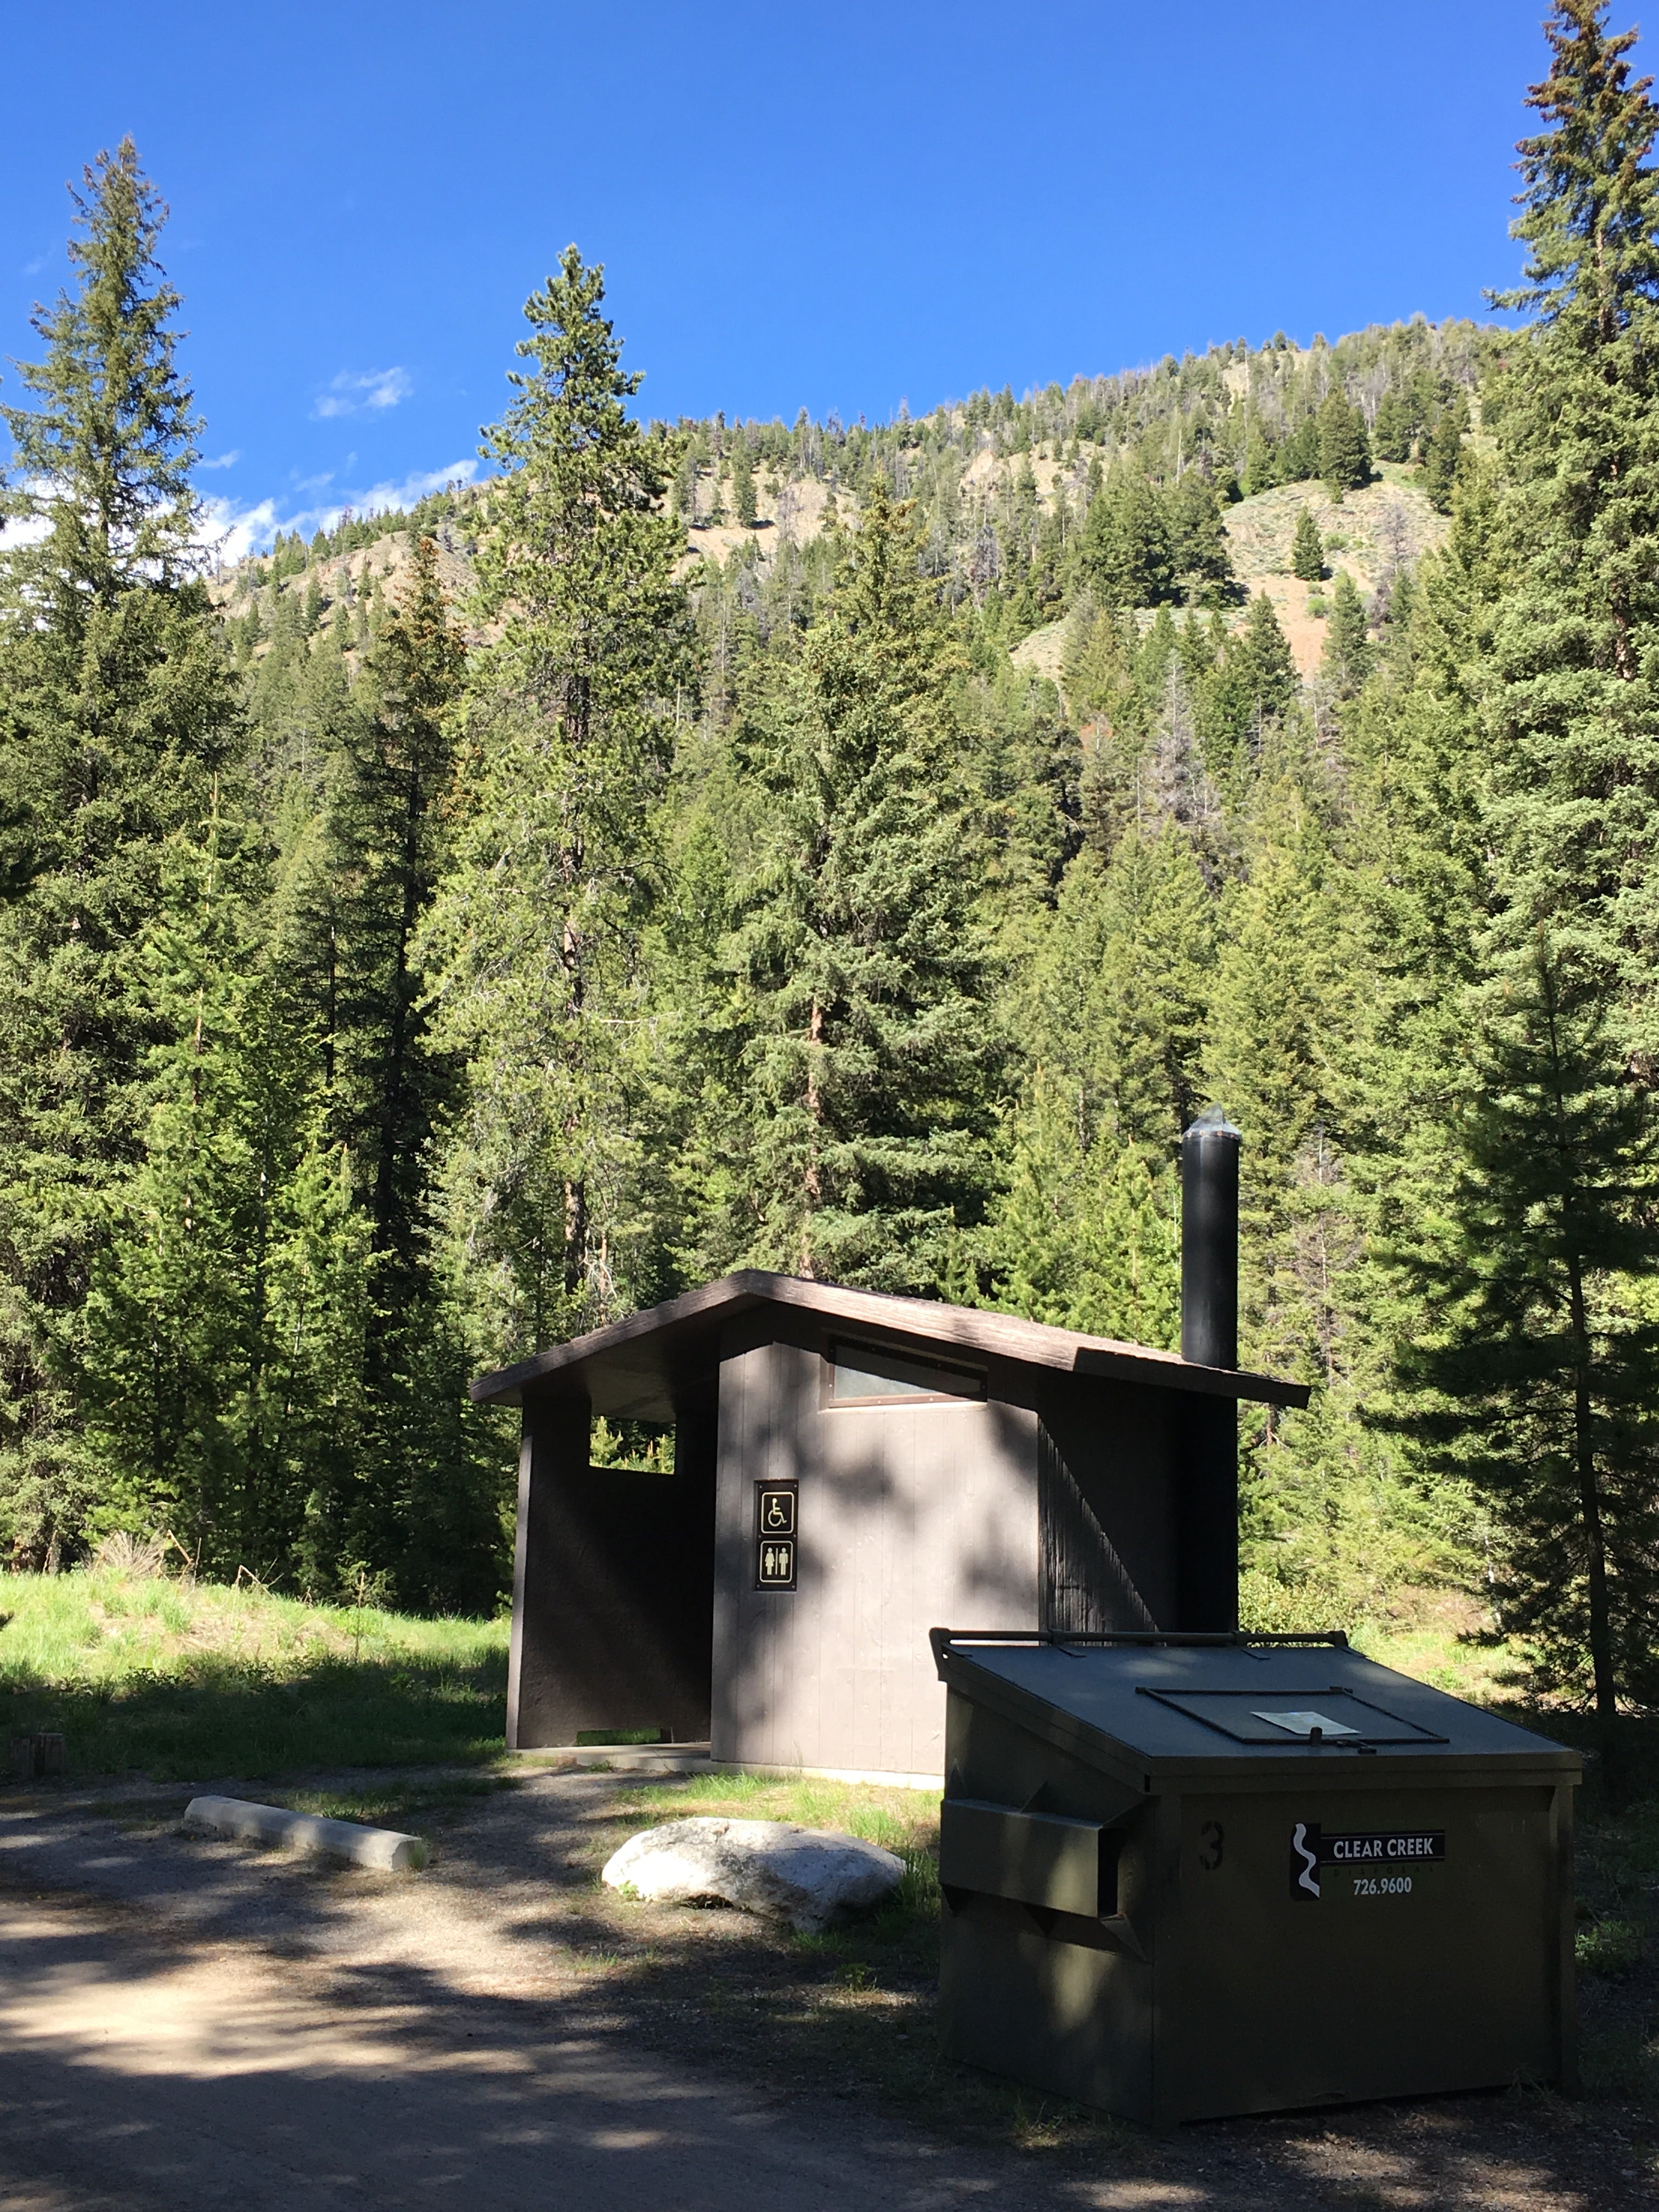 While the trash was bear proof, there were no bear boxes at camp sites